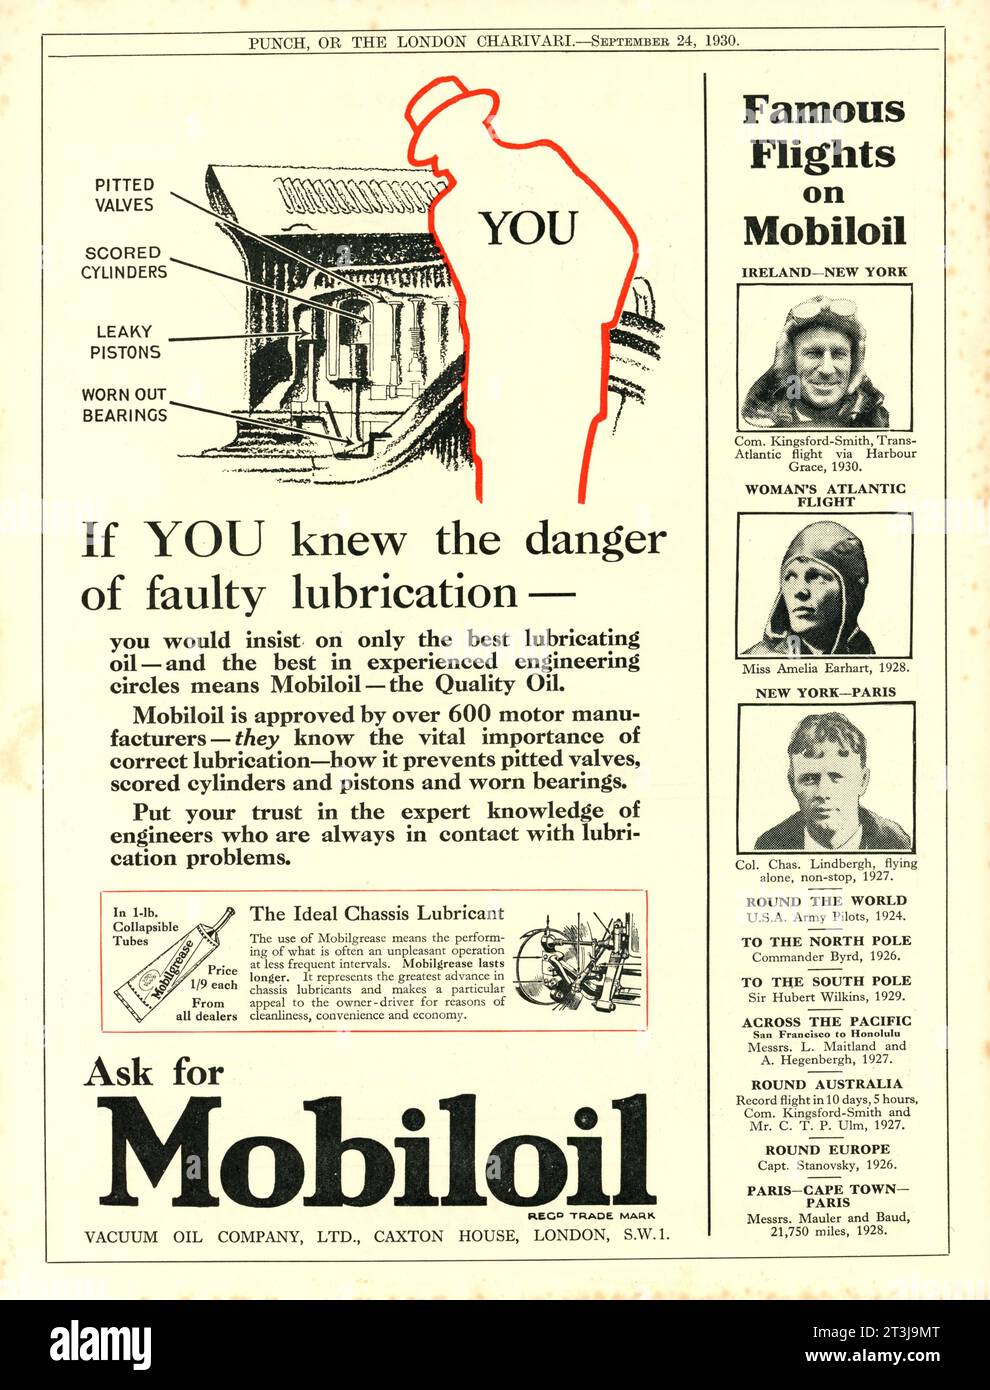 Commander KINGSFORD-SMITH Miss AMELIA EARHART and Colonel CHARLES LINDBERGH Famous Flights on MOBILOIL and MOBILGREASE 1930 British Magazine Advertisement Stock Photo